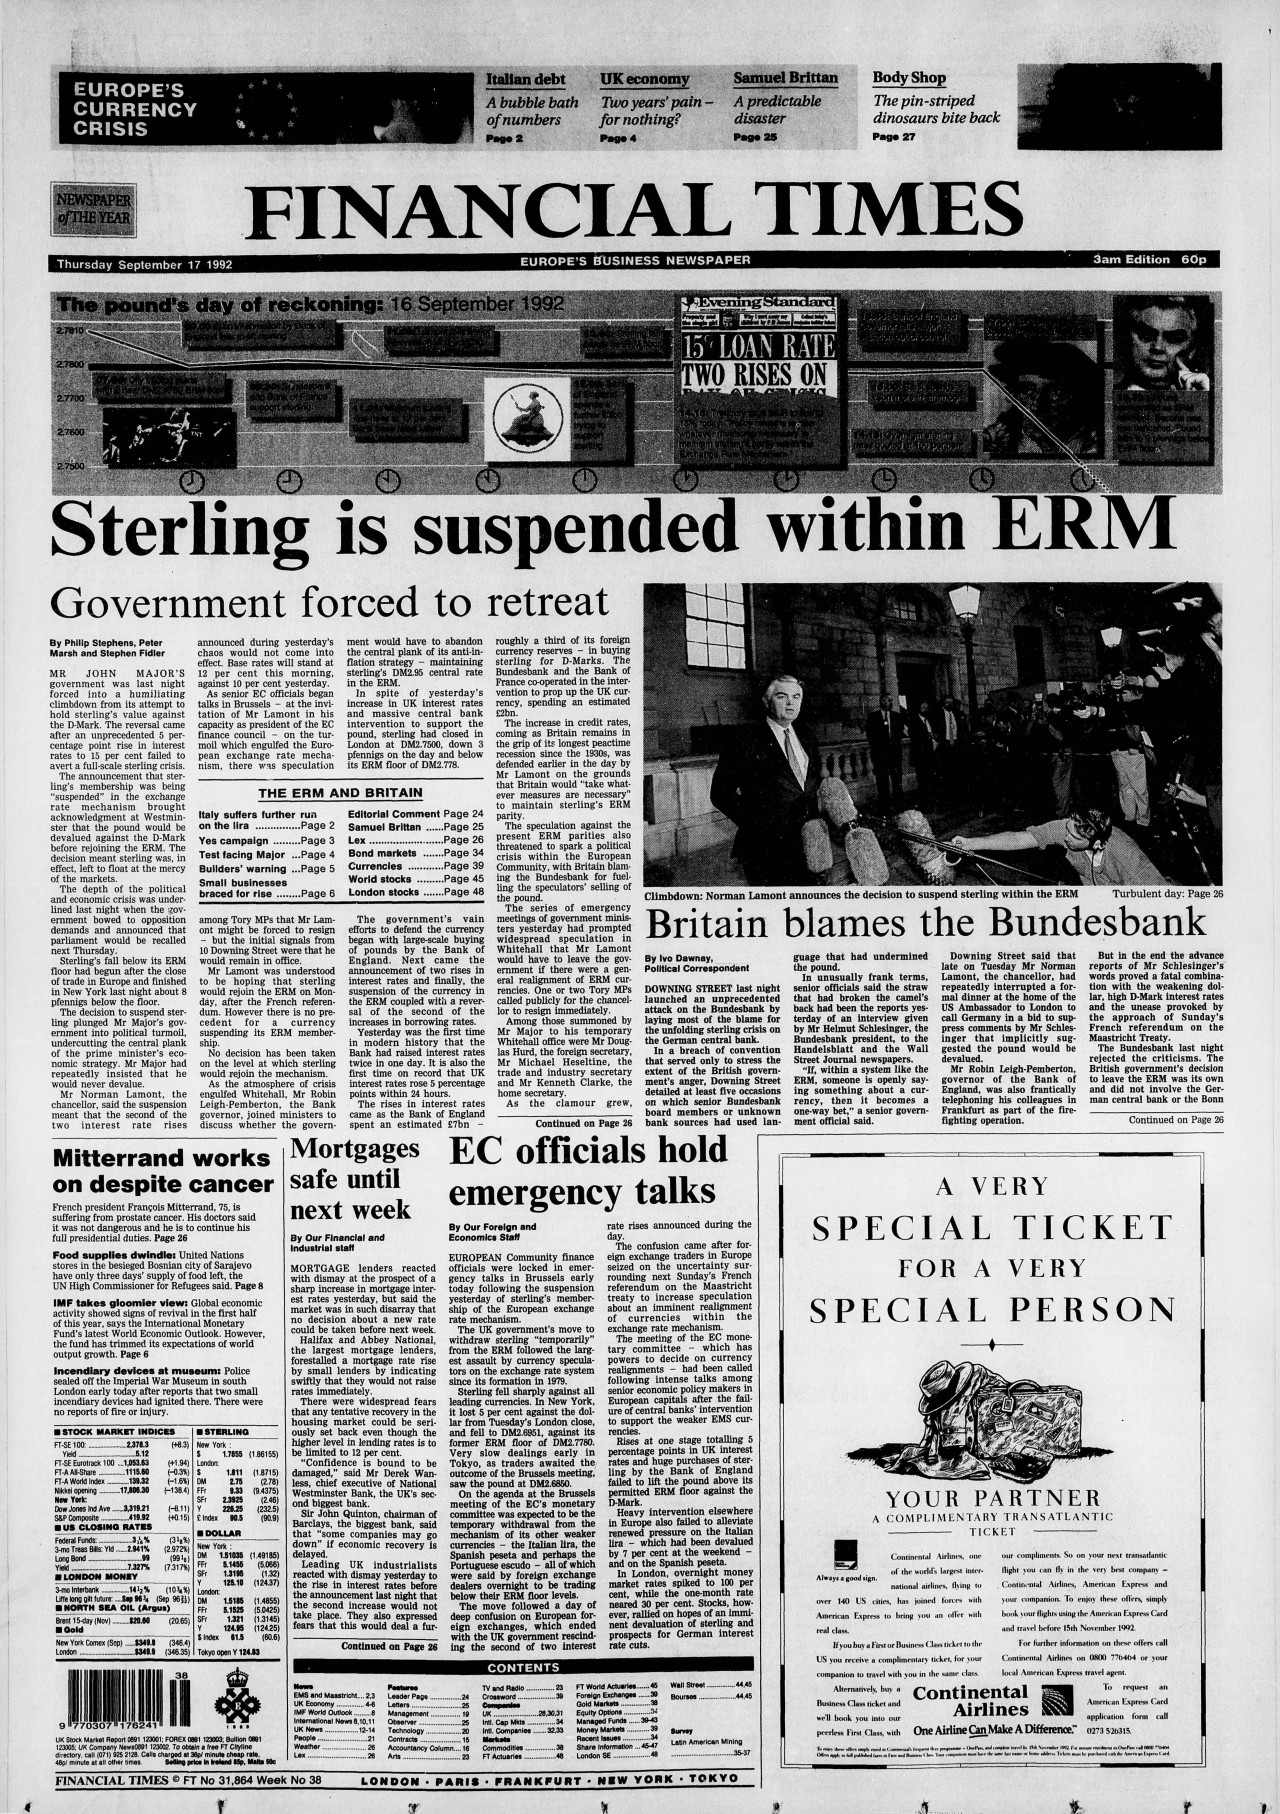 Financial Times front page on September 17 1992